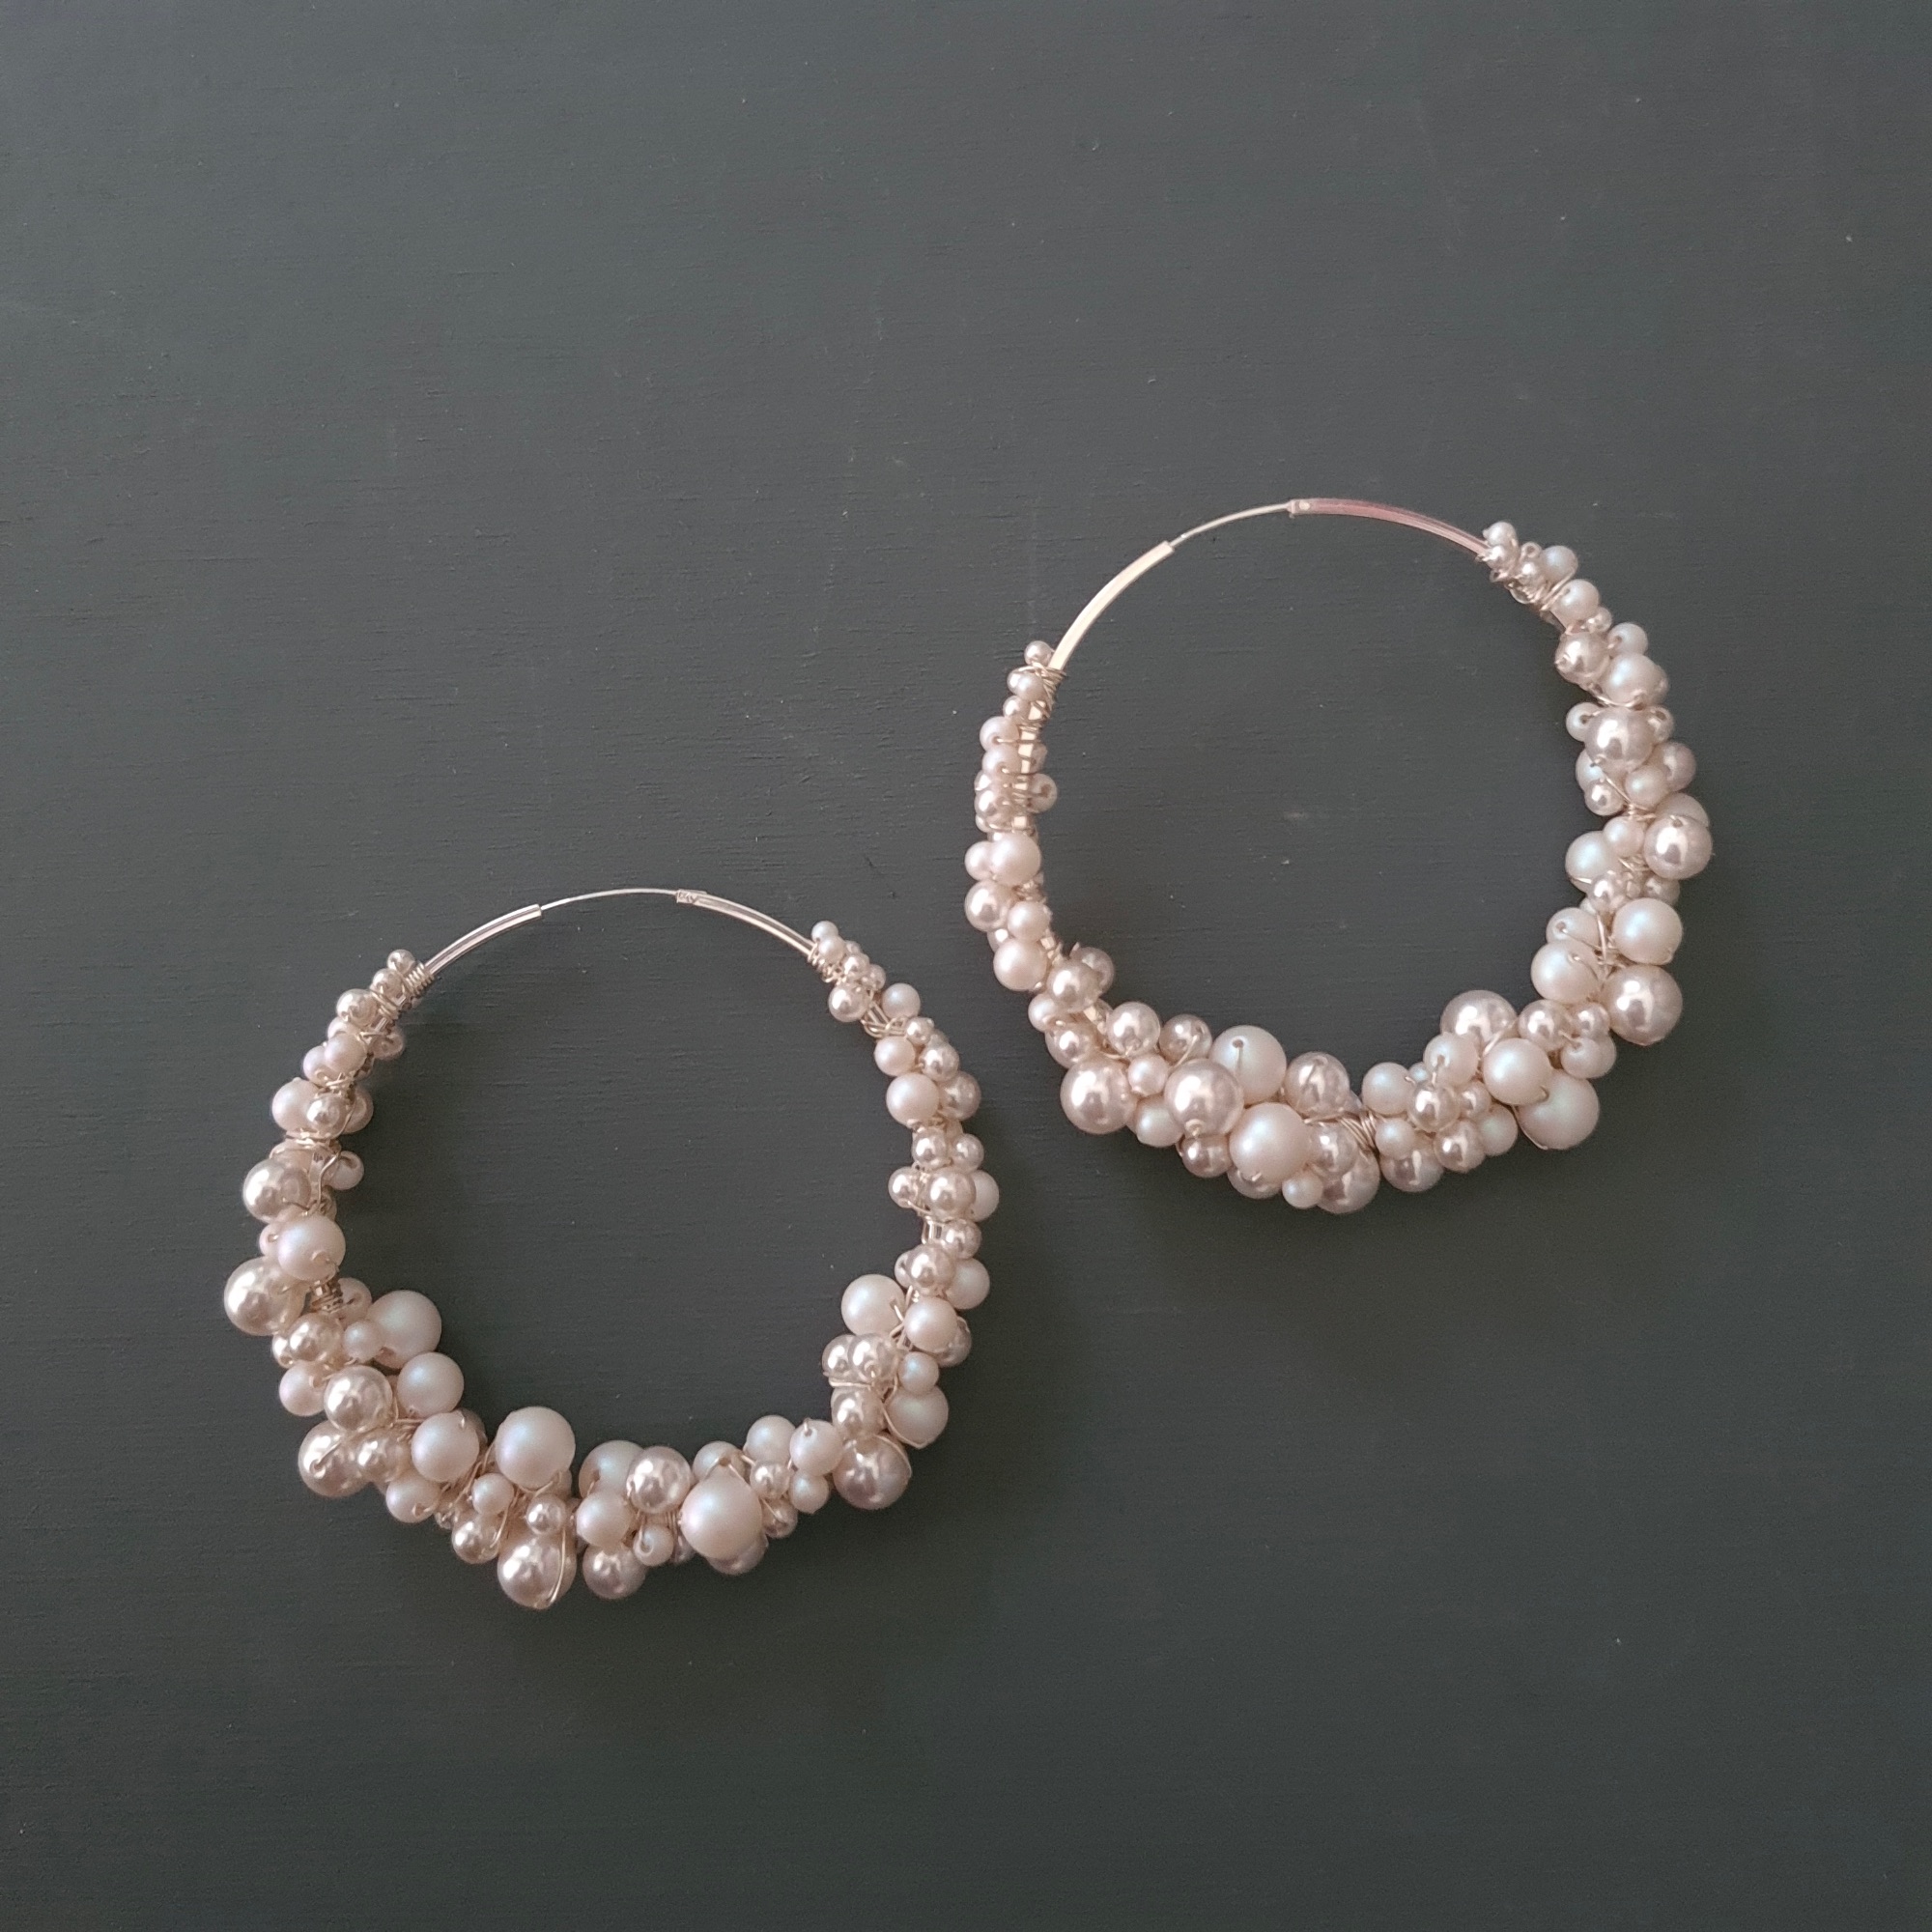 Recycled sterling silver statement bridal hoop earrings with white pearls